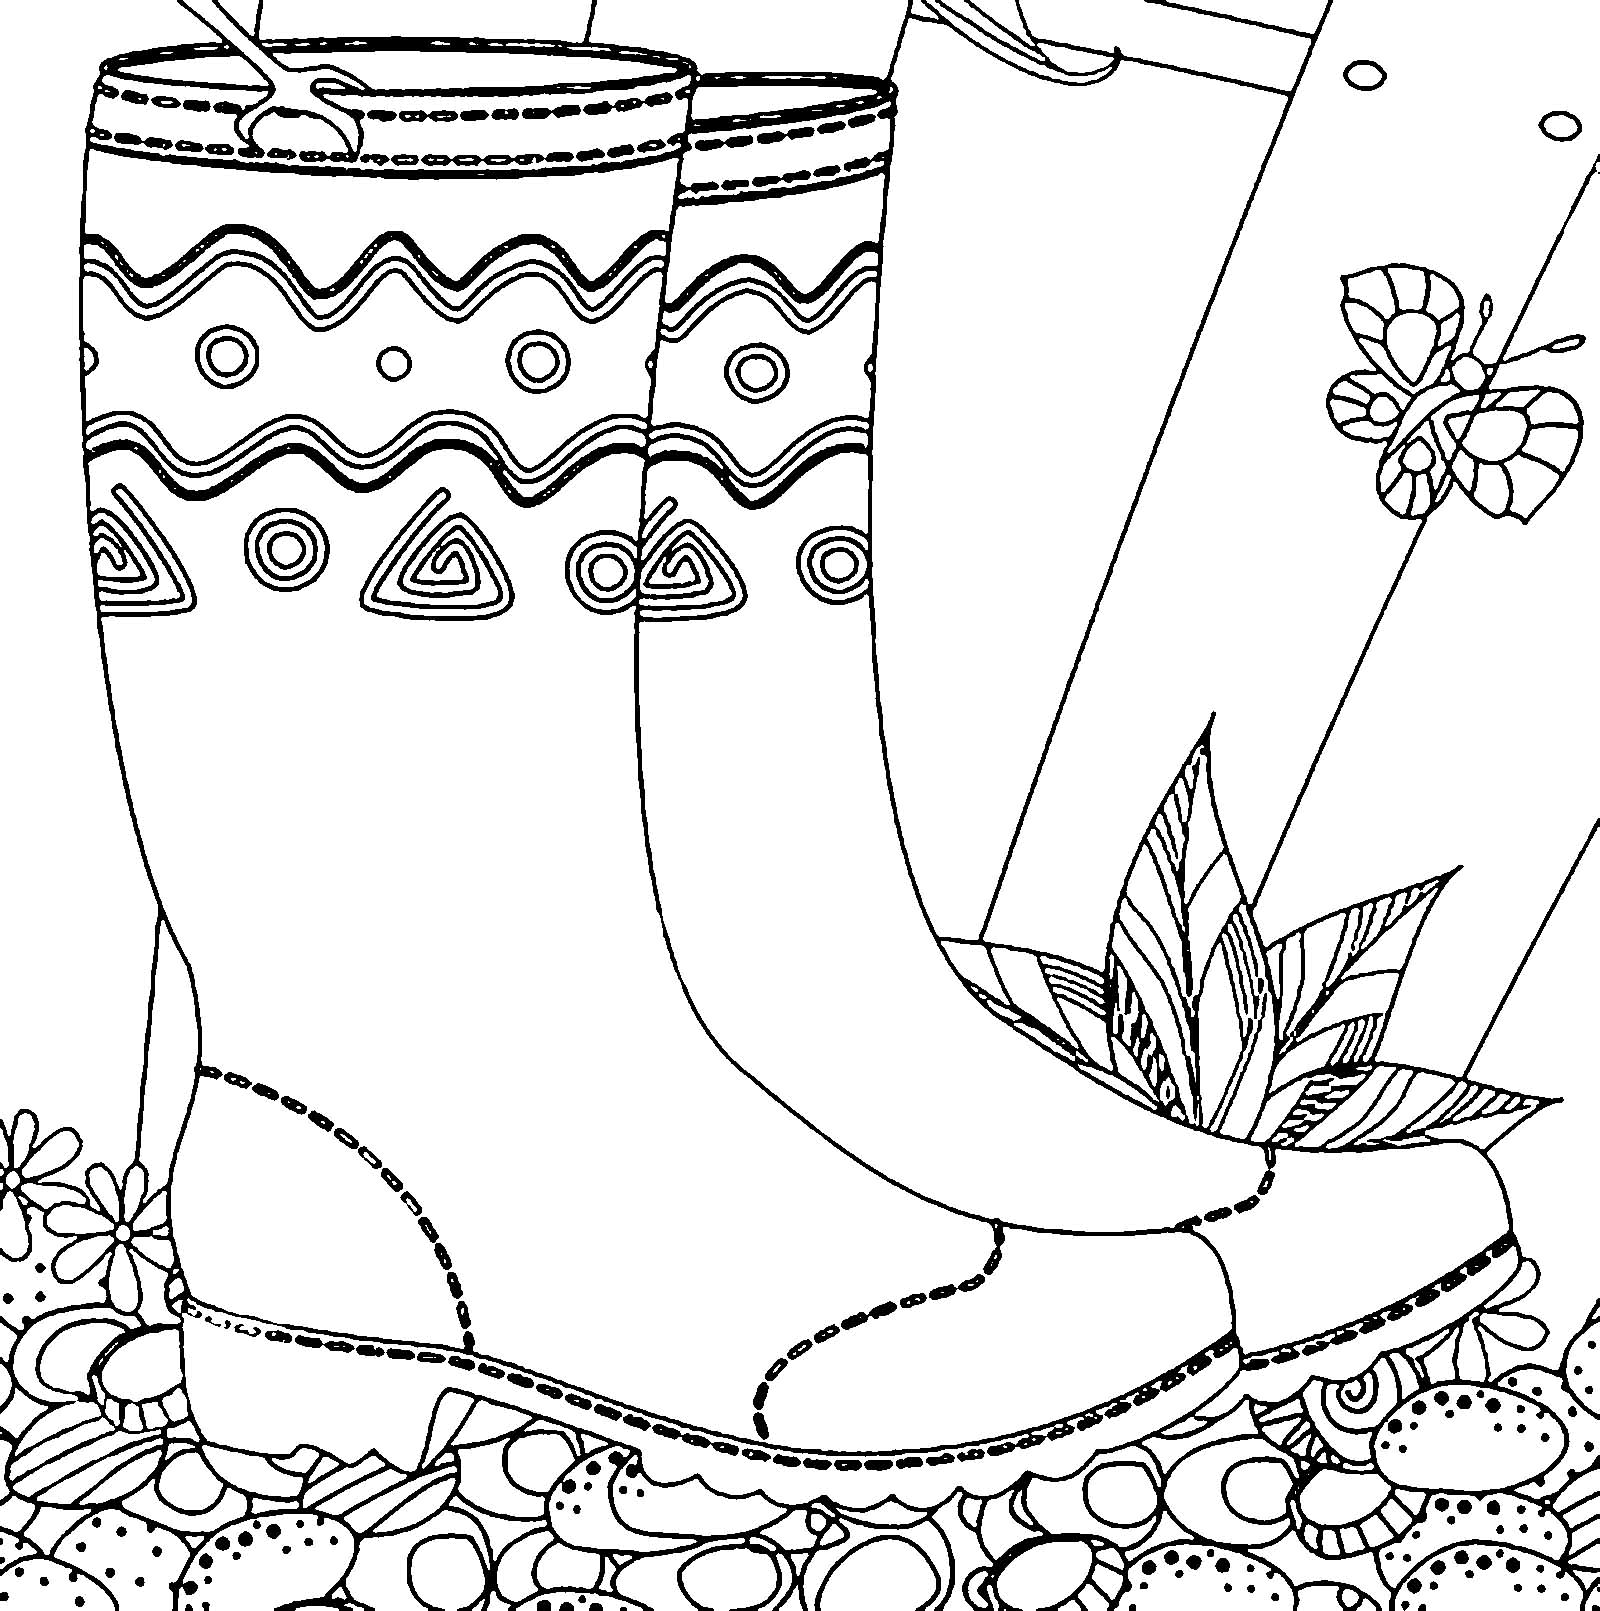 Boots with a pattern